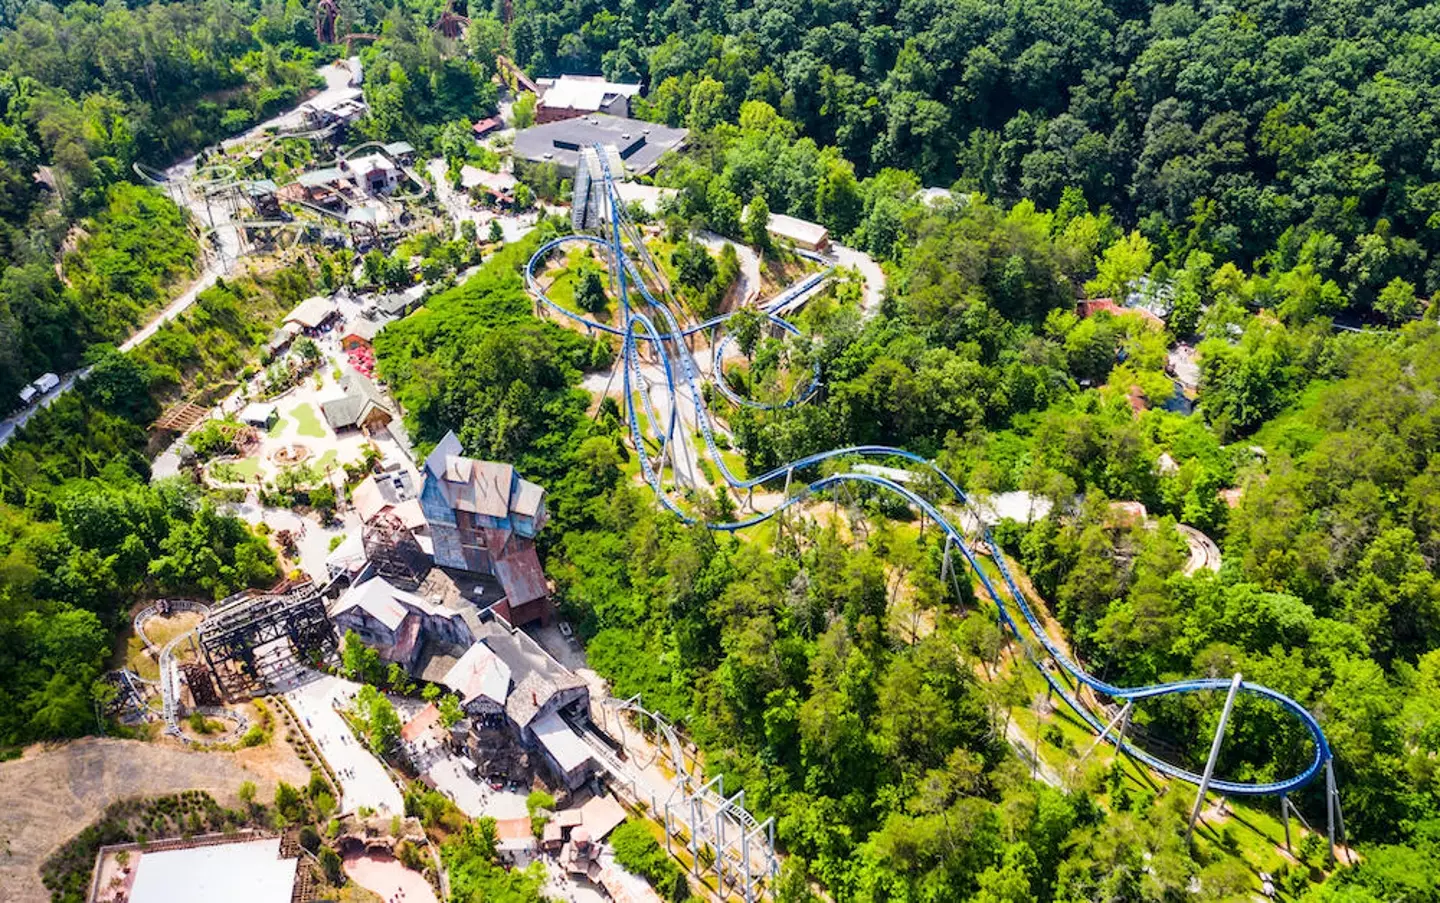 Dollywood has closed its drop ride following the incident in Orlando.